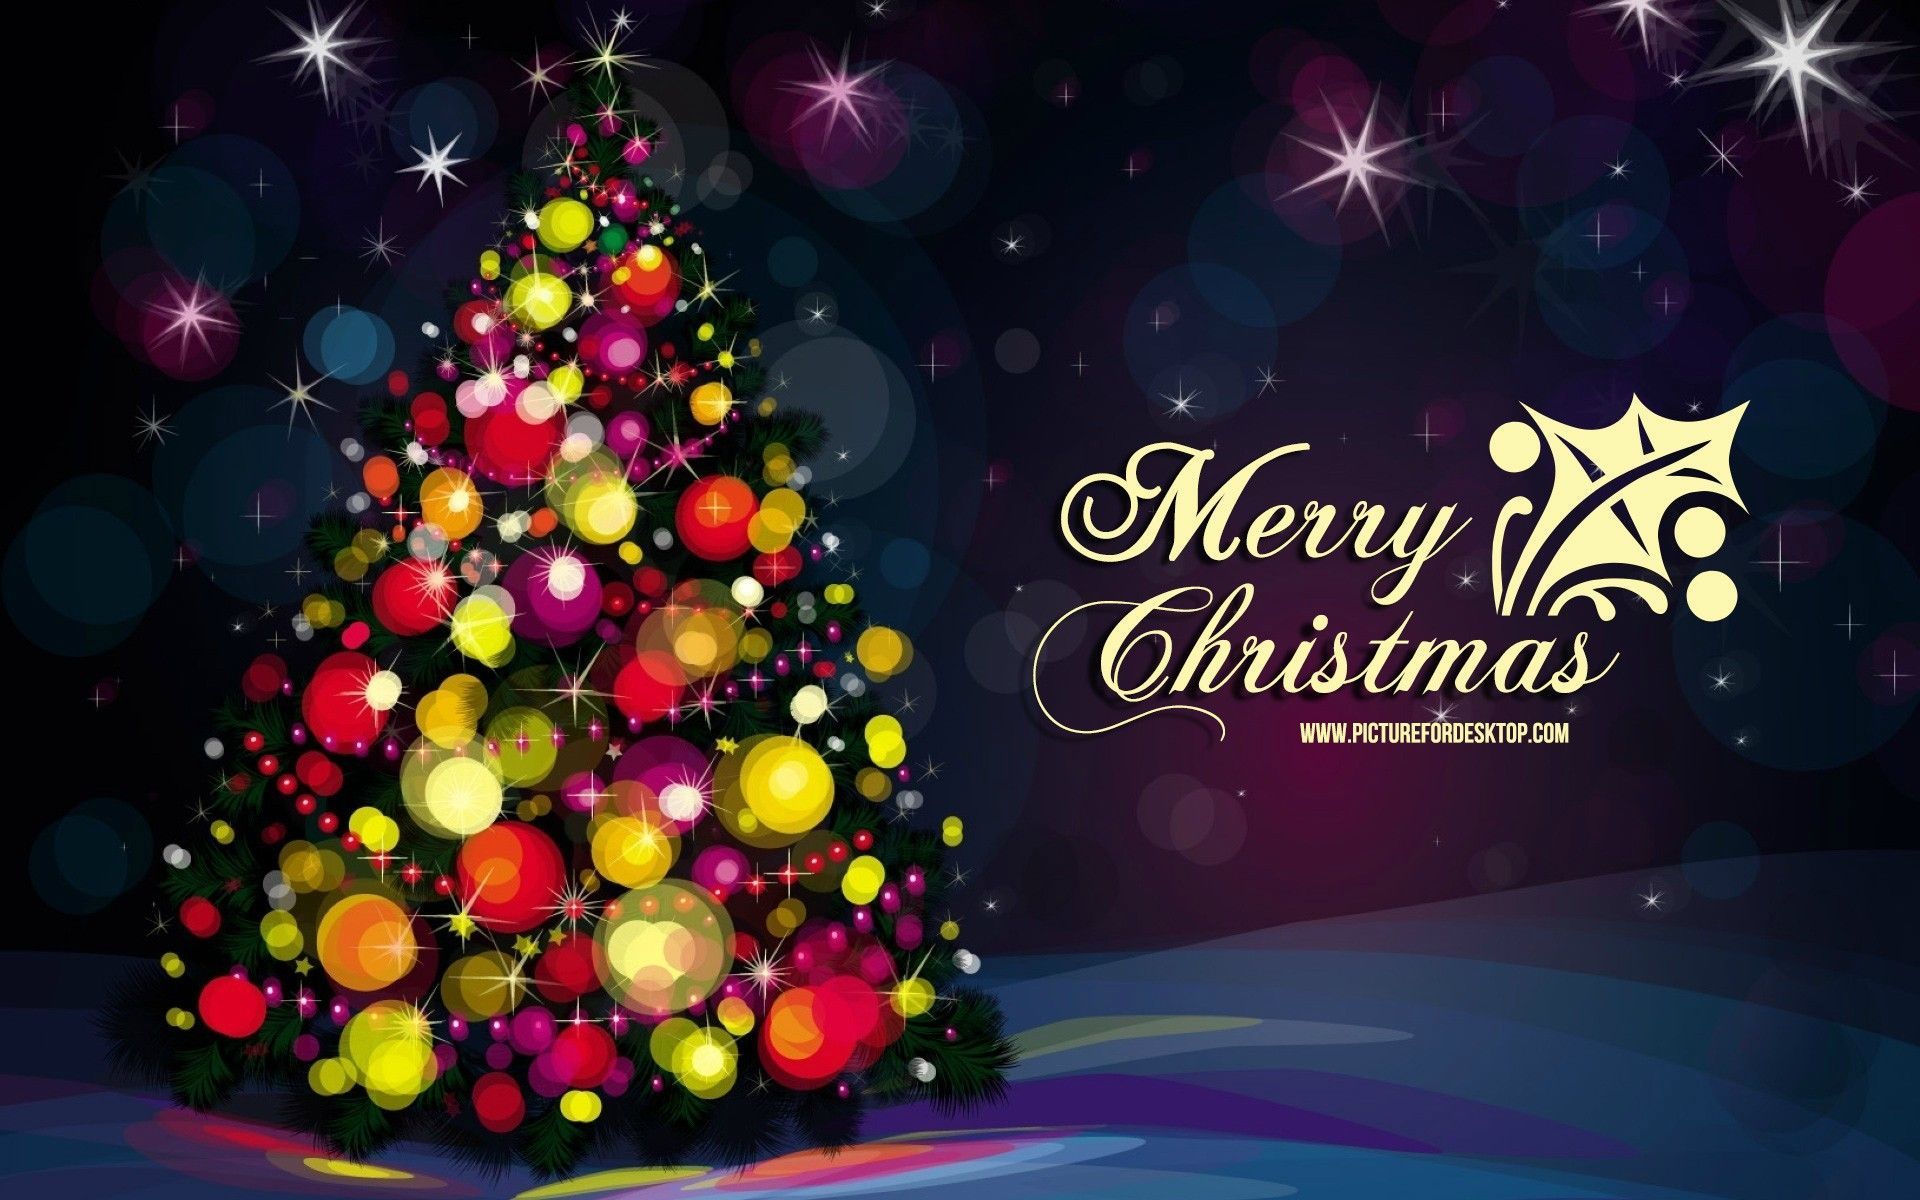 Merry Christmas Images Wallpapers Pictures Xmas Hd